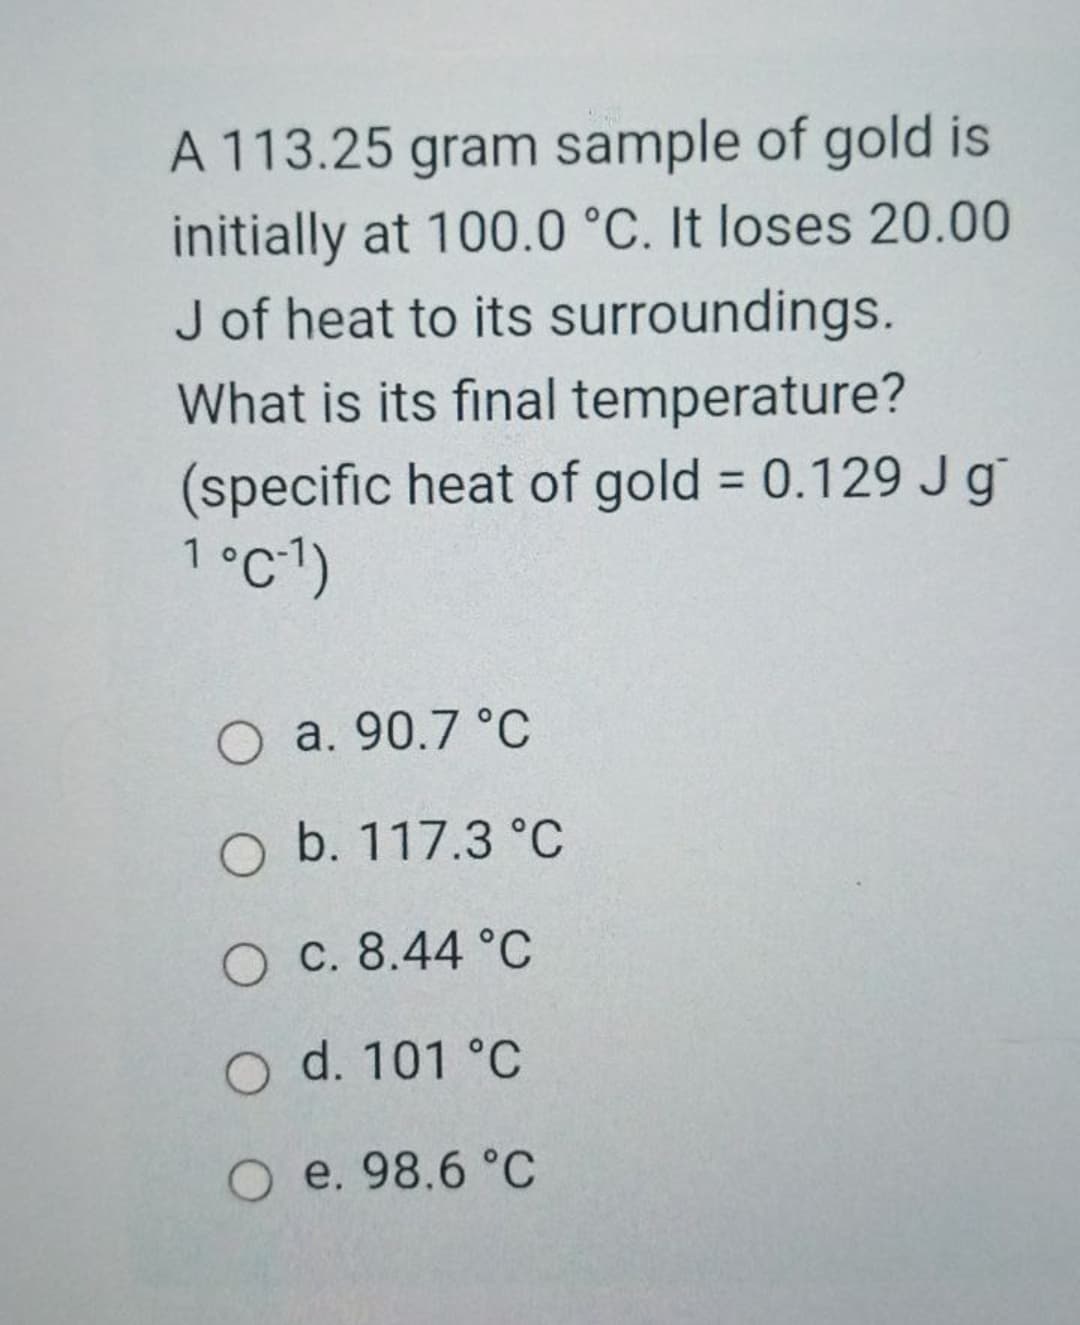 A 113.25 gram sample of gold is
initially at 100.0 °C. It loses 20.00
J of heat to its surroundings.
What is its final temperature?
(specific heat of gold = 0.129 Jg
1°c-1)
%3D
O a. 90.7 °C
O b. 117.3 °C
O C. 8.44 °C
O d. 101 °C
O e. 98.6 °C
